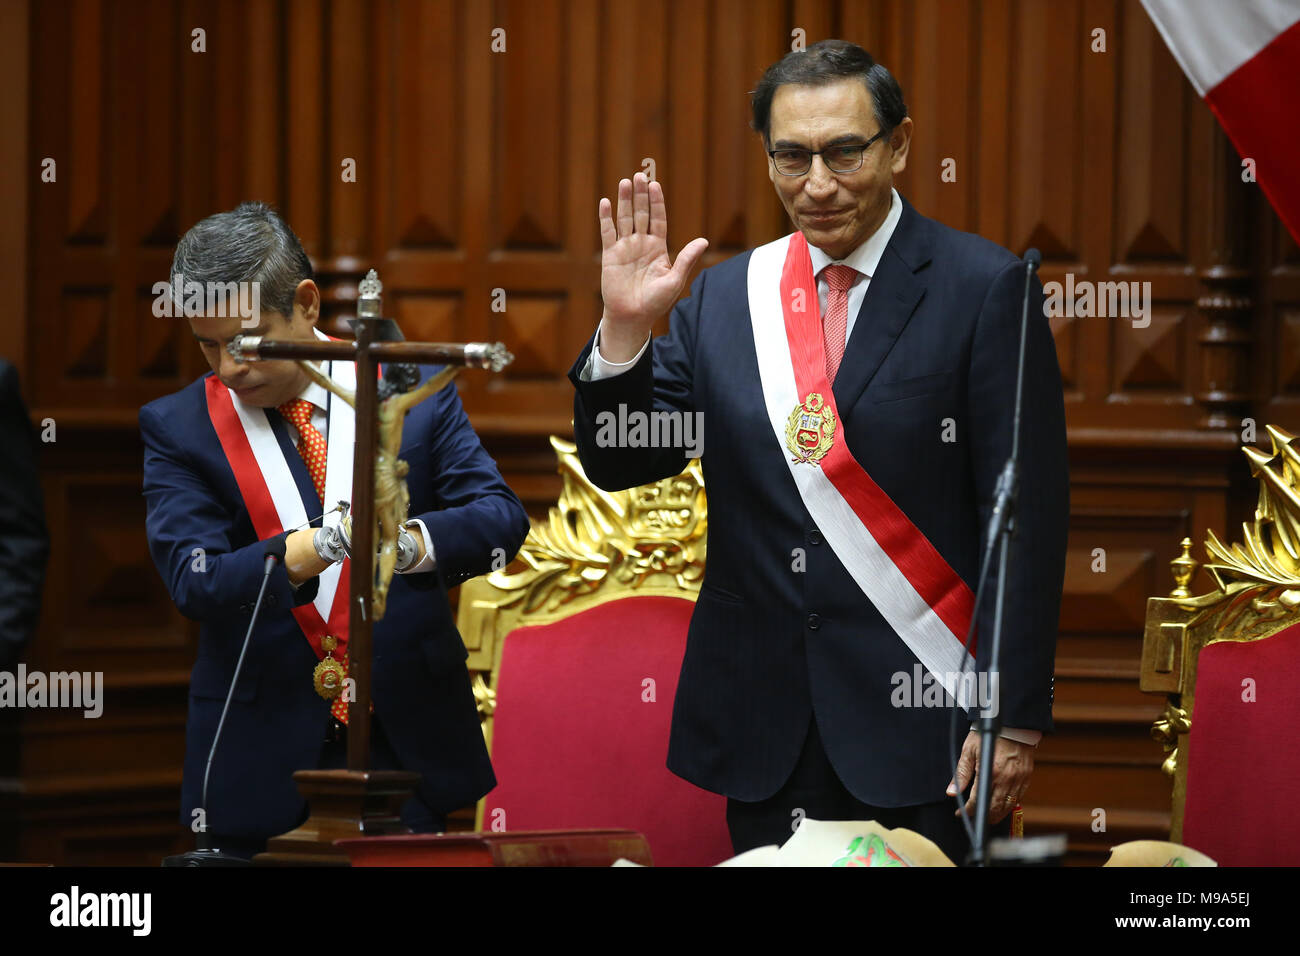 23 March 2018, Peru, Lima: Martin Vizcarra (R) is being sworn in as head of state in the parliament. The 55-year-old took over the office after Kuczynski's withdrawal. Previously, the parliament had accepted Kuczynski's resign with a large majoraty. The current term goes until 2021. Photo: Juan Osorio/dpa Stock Photo